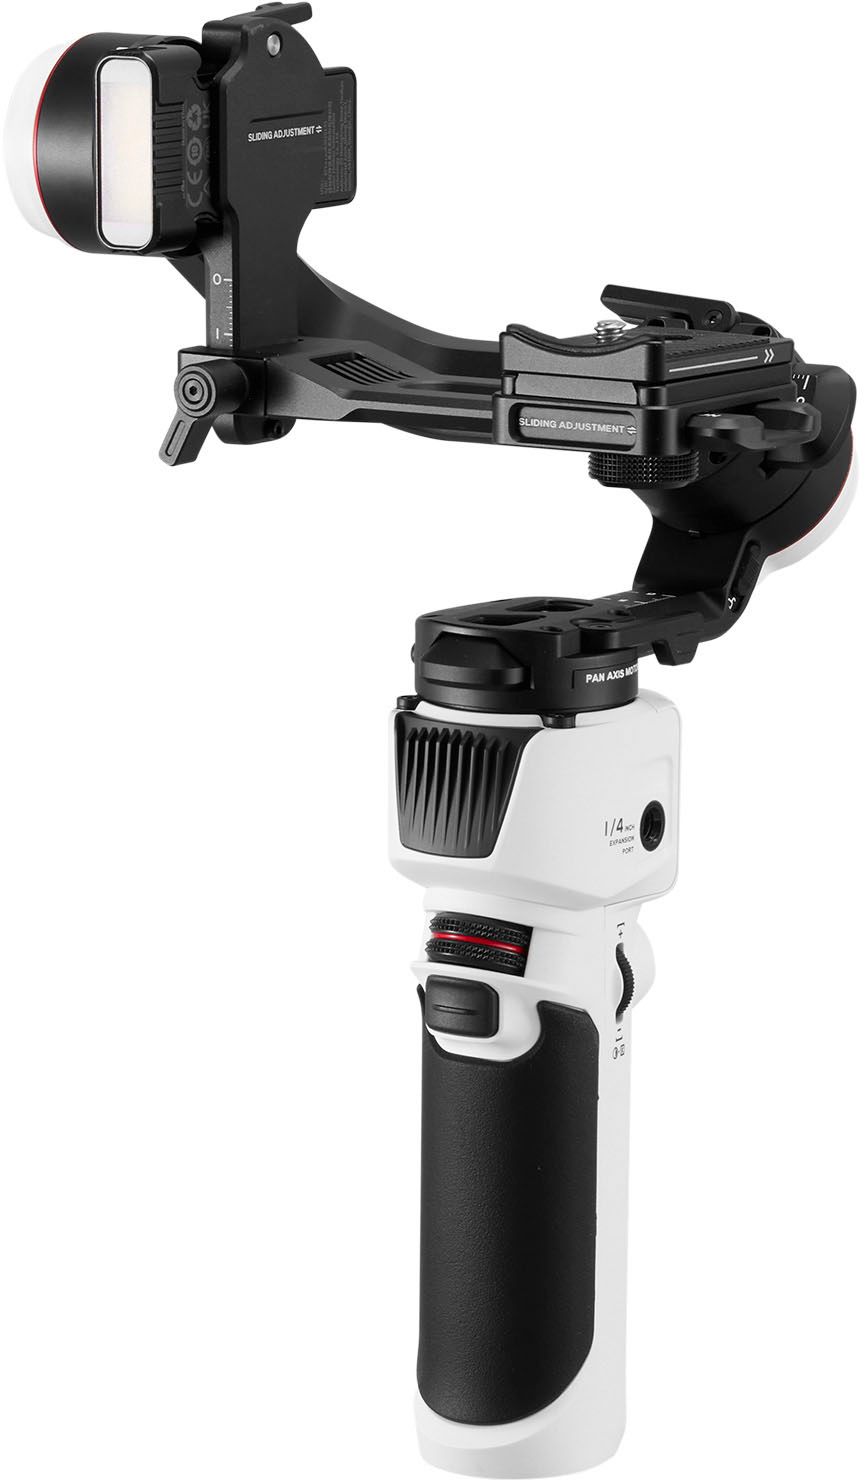 Angle View: Zhiyun - Crane-M 3S 3-Axis Gimbal Stabilizer for Smartphones, Action, or Mirrorless Cameras with Detachable Tri-pod Stand - White